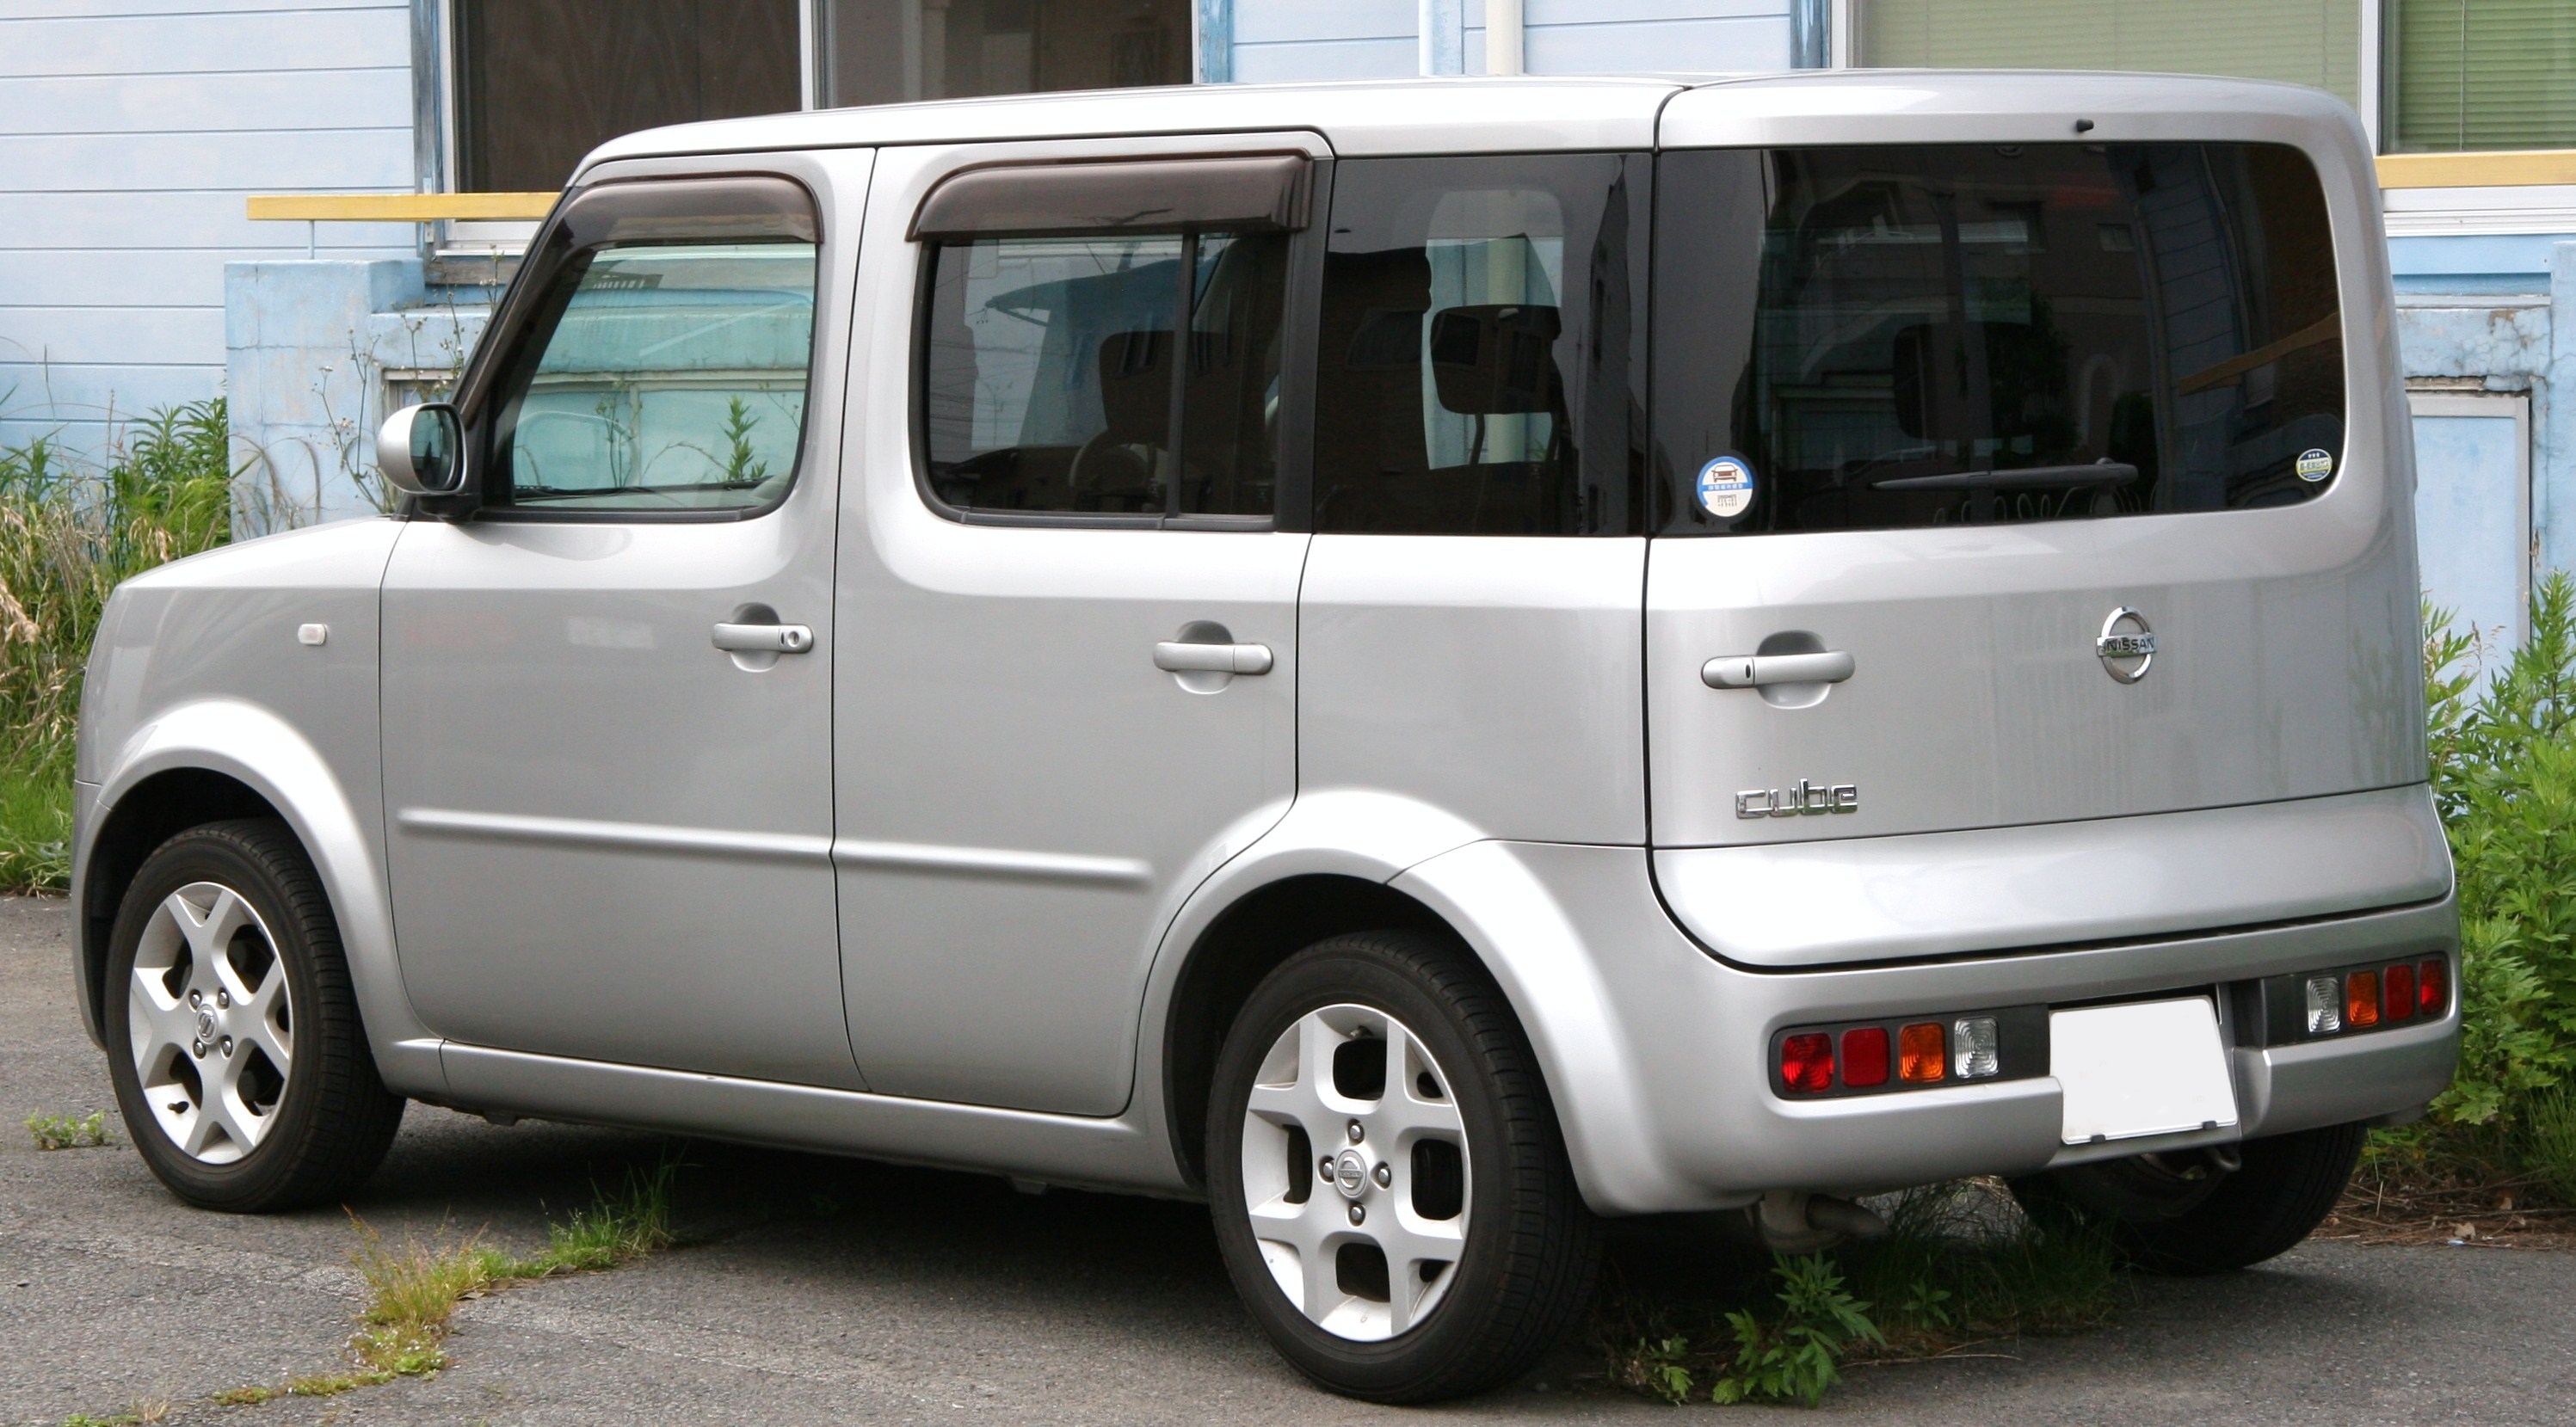 🔥 Free download nissan cube wallpaper Auto [2994x1659] for